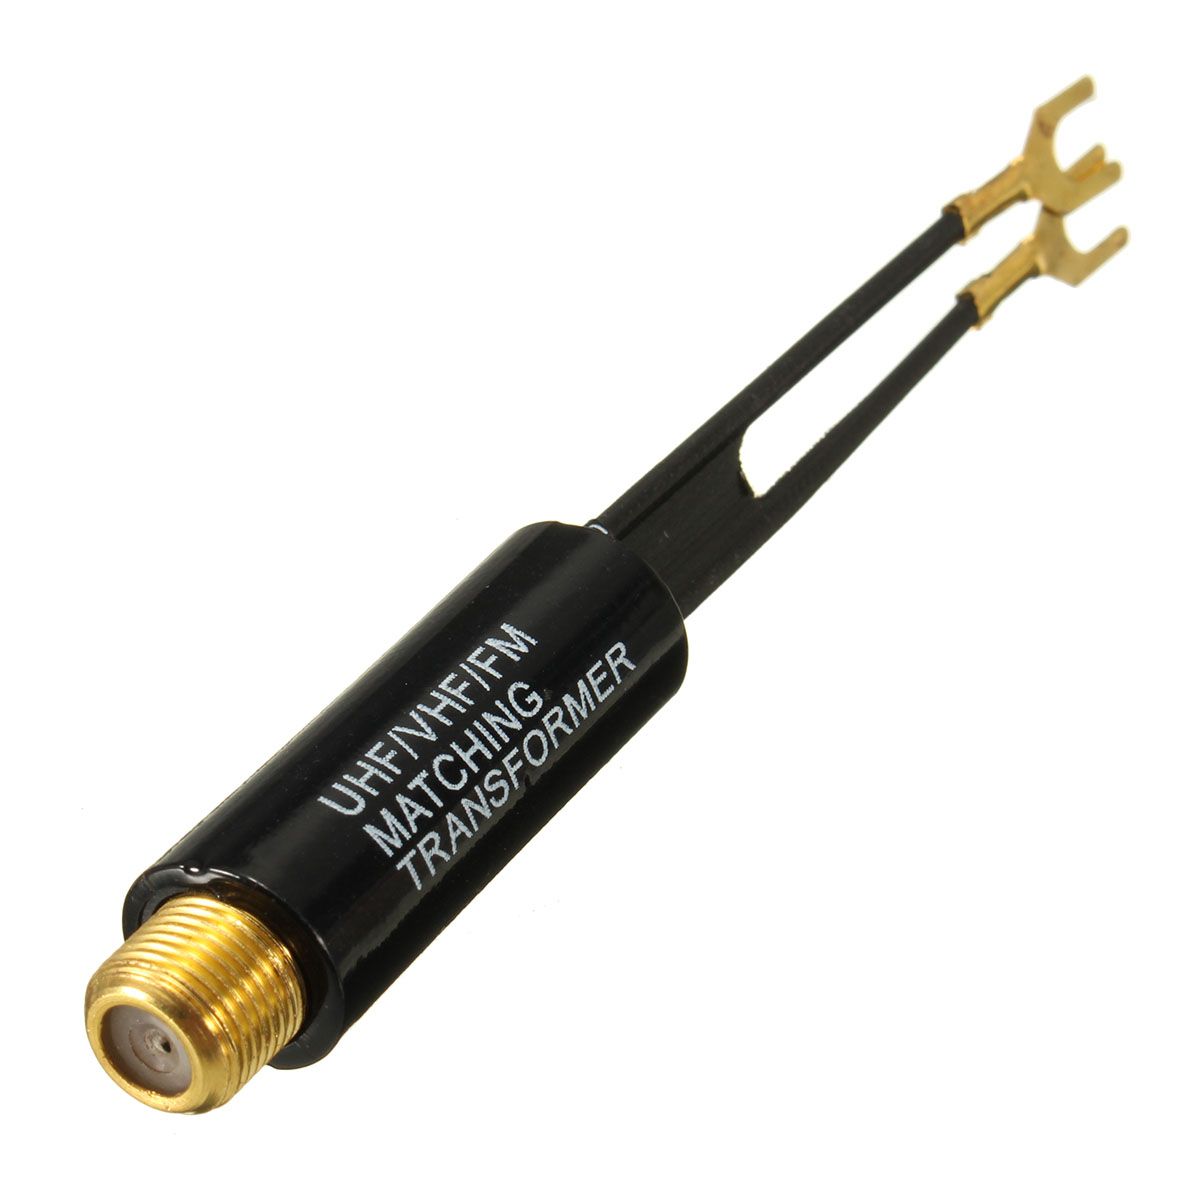 UHF-VHF-FM-Gold-Plated-75-300-Ohm-TV-Coaxial-Antenna-Cable-Matching-Transformer-1681940